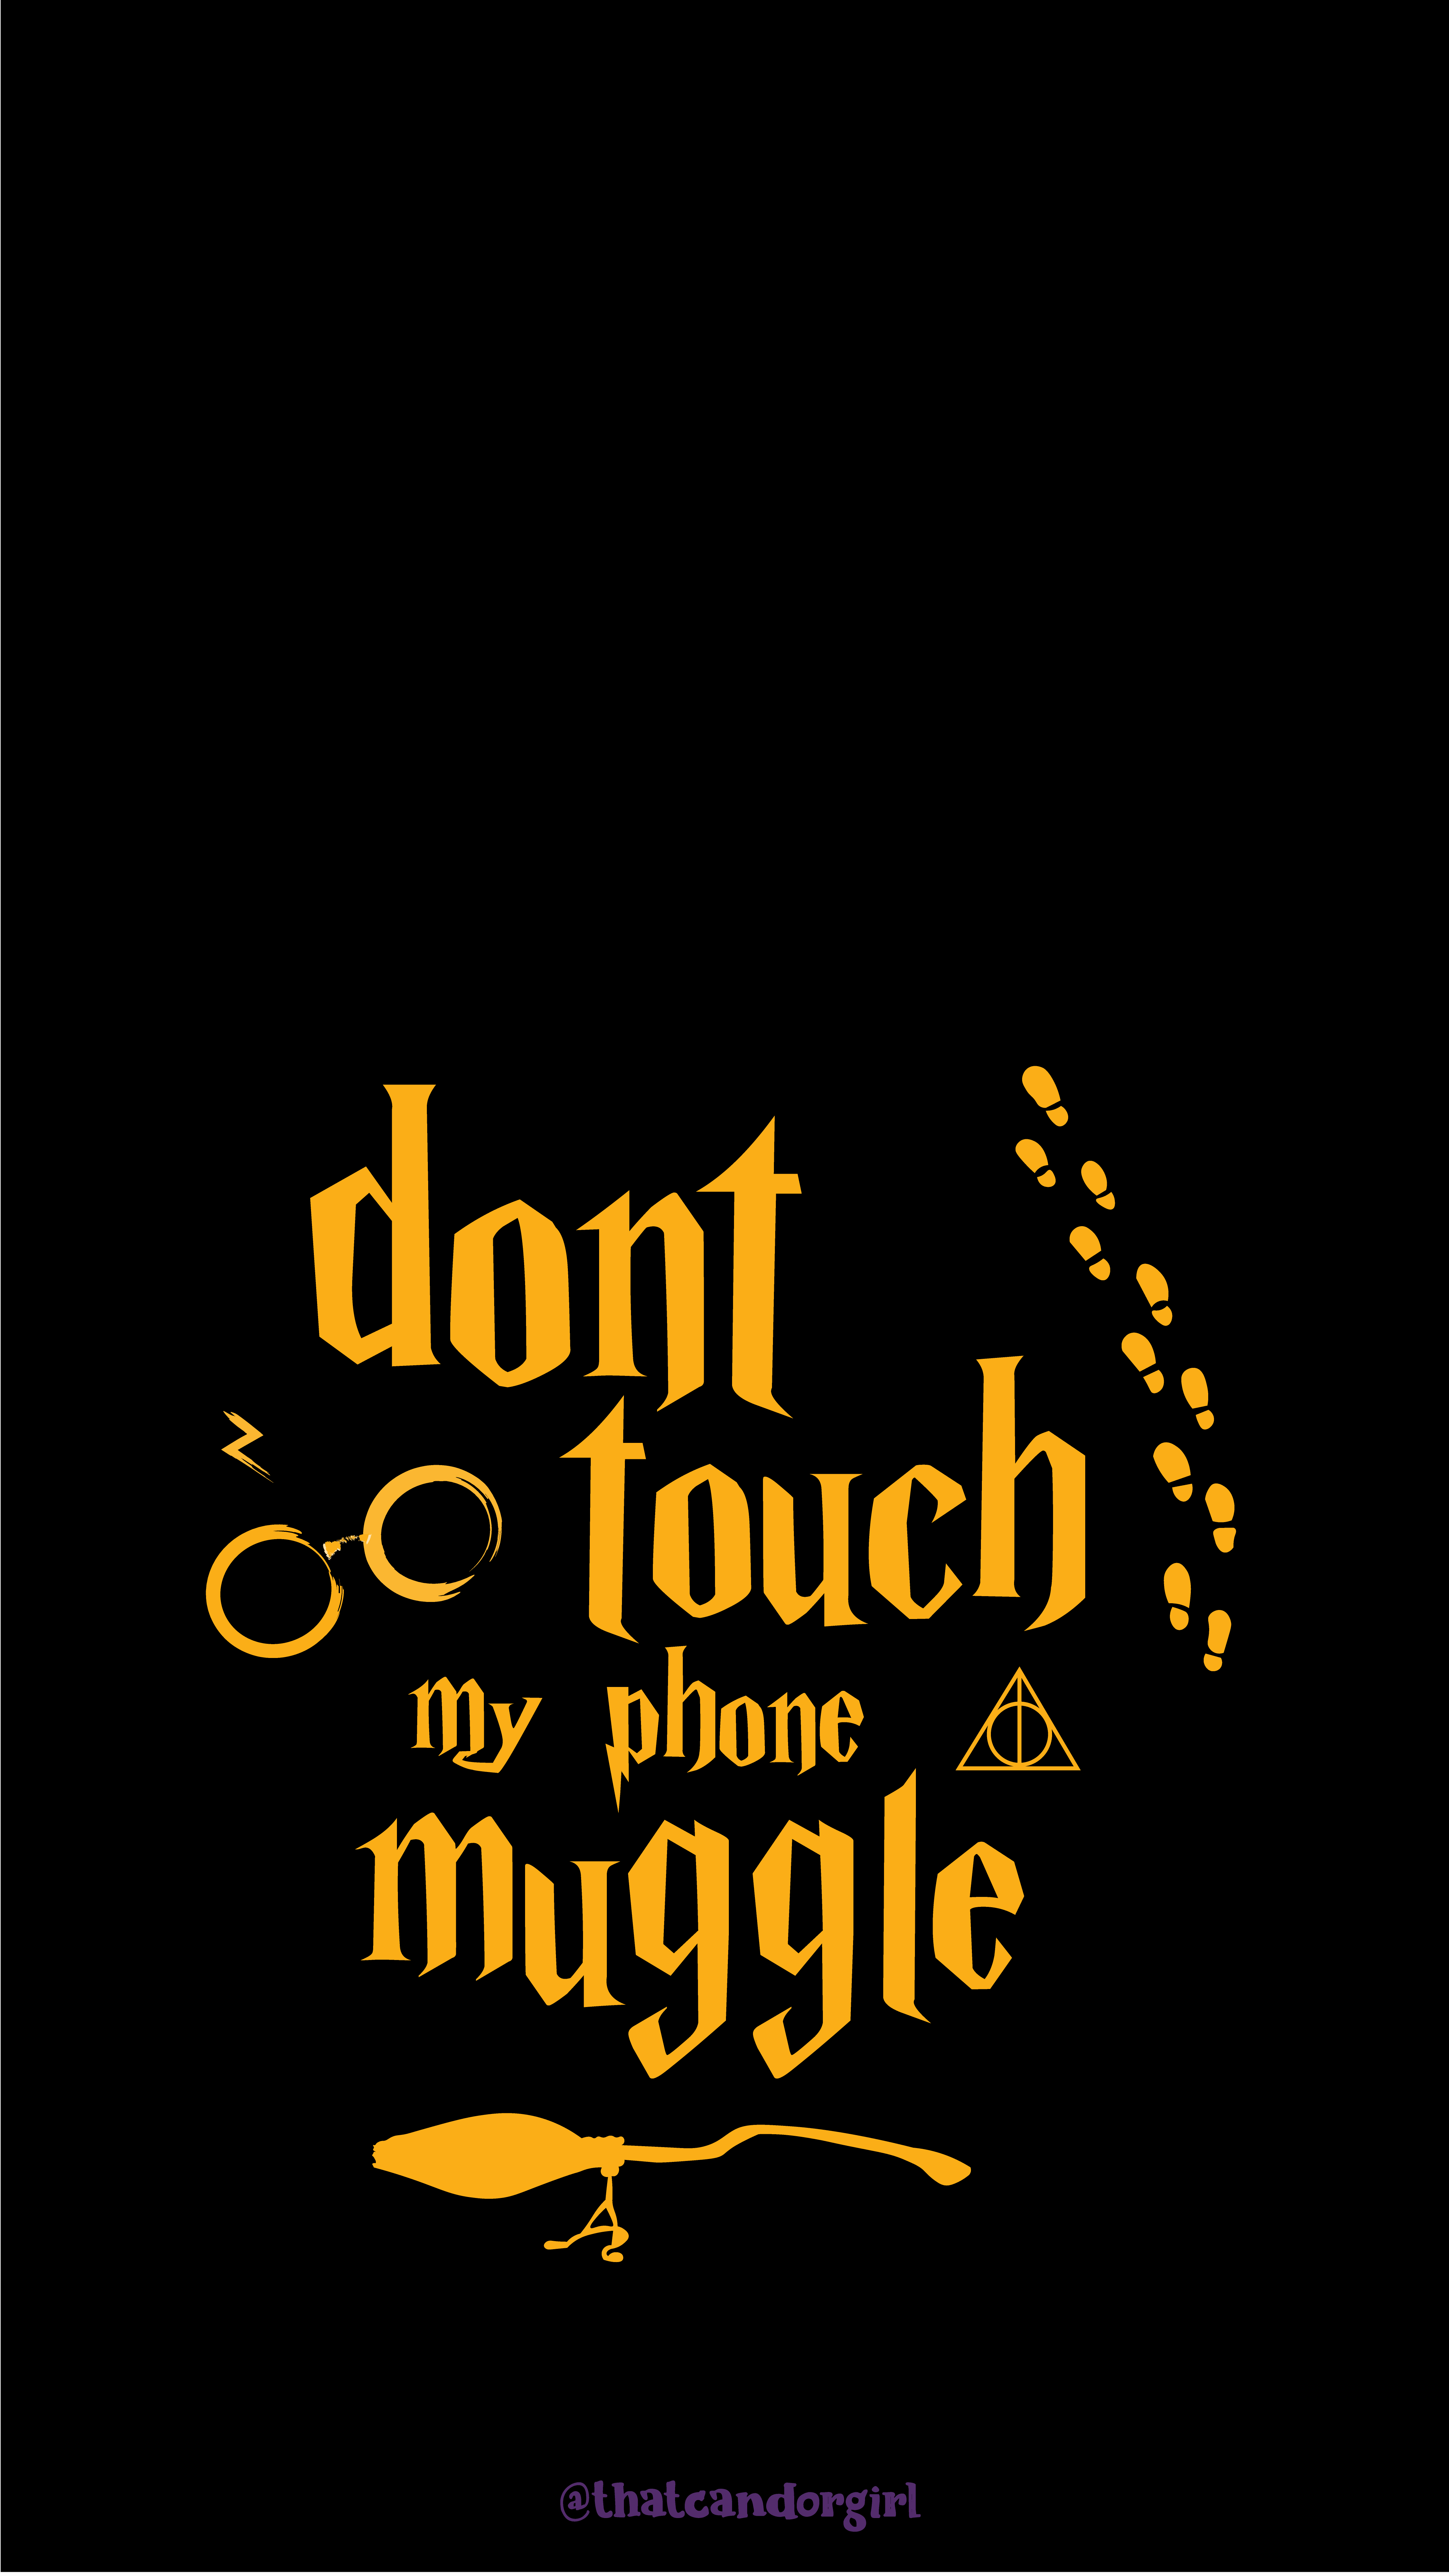 Don't Touch My Phone Muggle: Harry Potter Theme Witty Wallpaper: Marauder's Map Footsteps & Glasses. Harry potter theme, Harry potter wallpaper, Witty